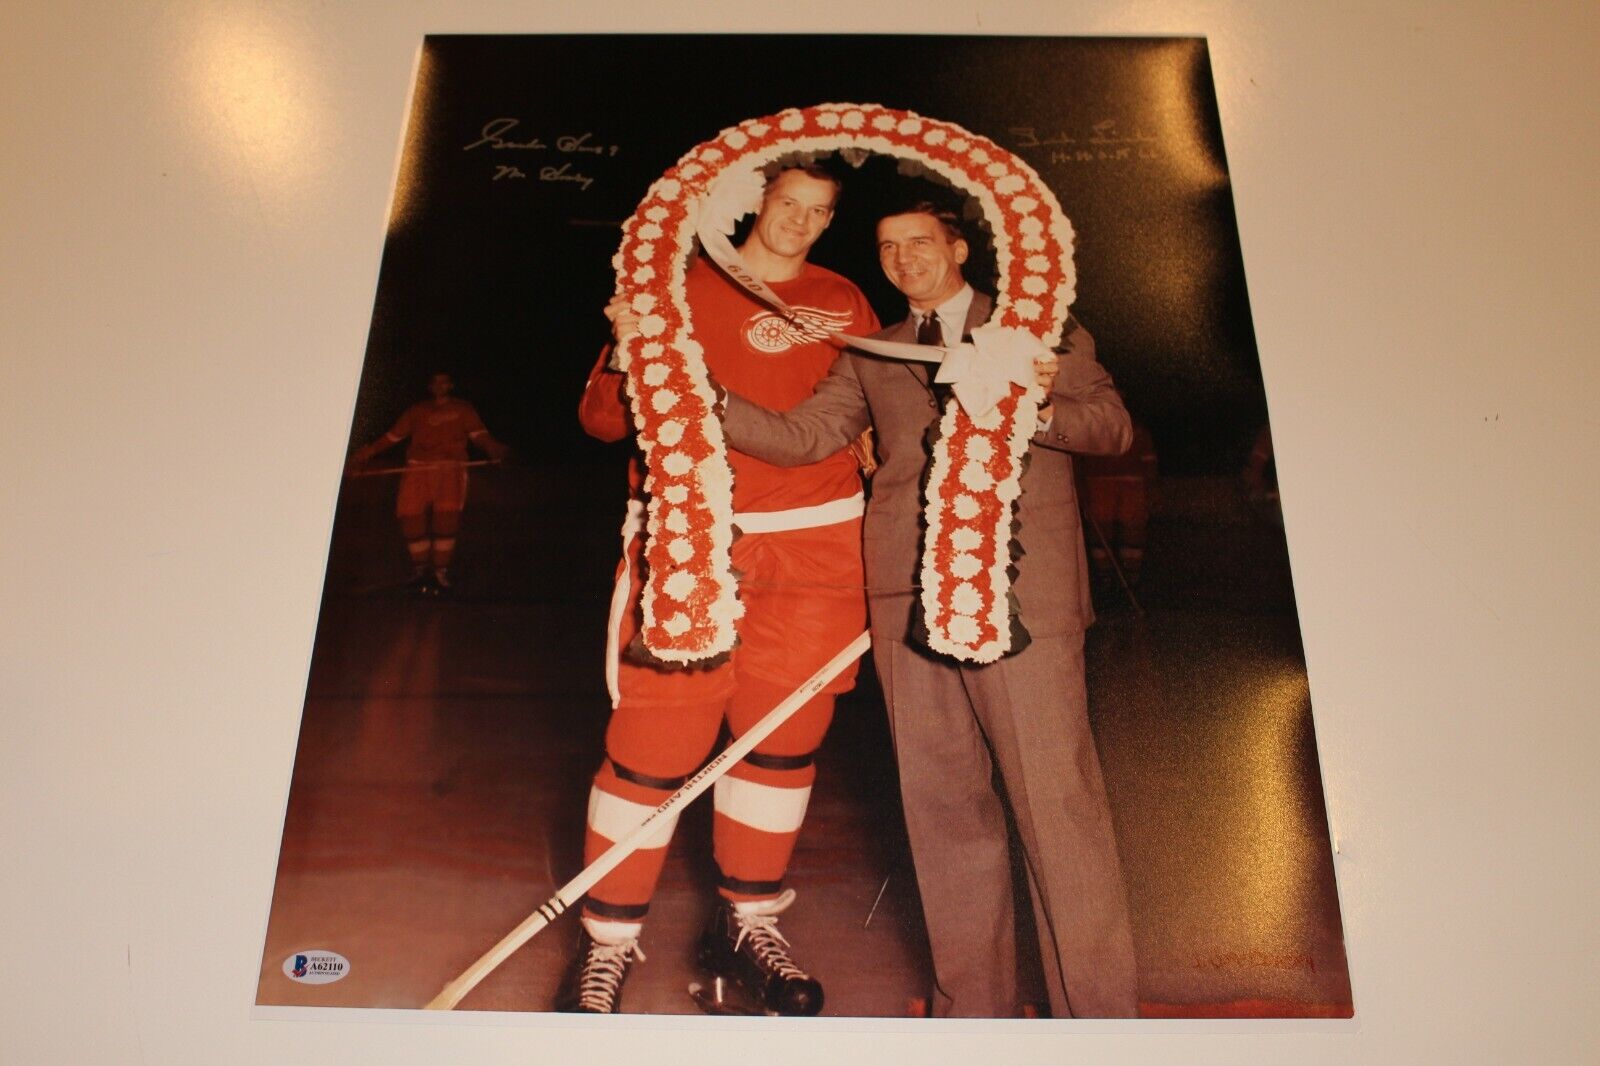 Gordie Howe Autographed Signed & Ted Lindsay Dual Detroit Red Wings 16X20 Photo PSA/DNA COA